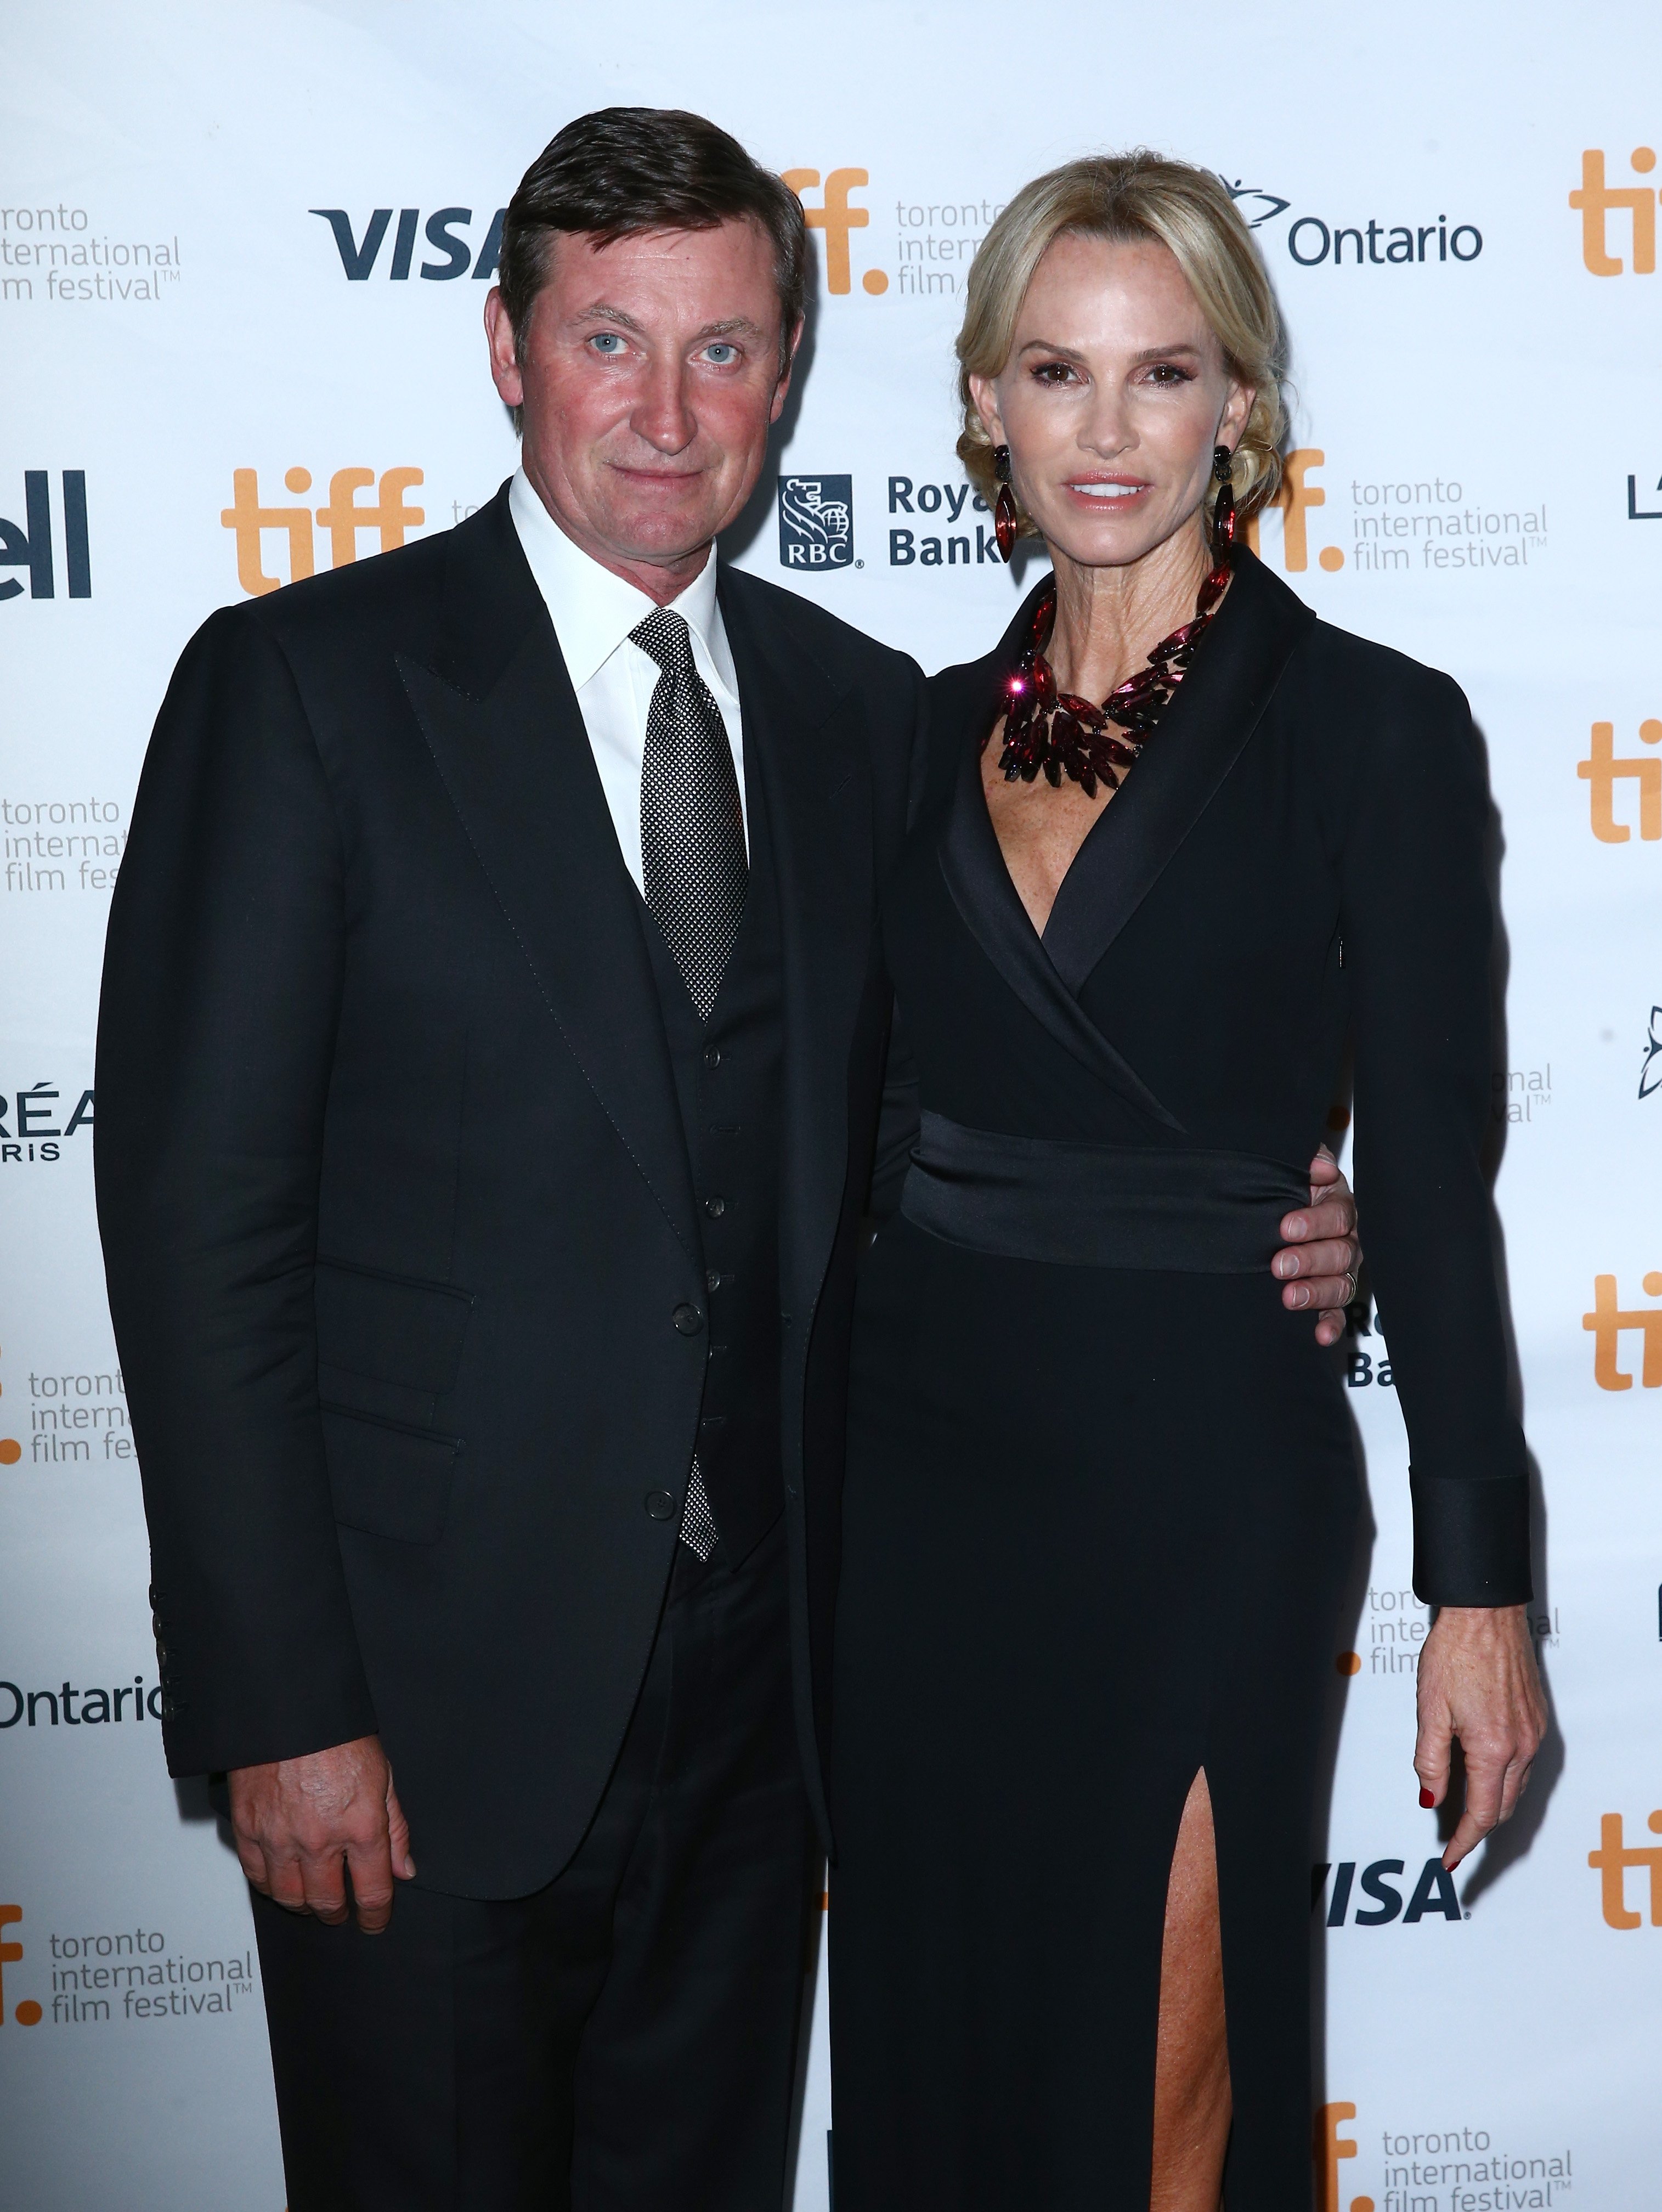 Wayne Gretzky and actress Janet Jones attend the "The Sound And The Fury" Premiere at Ryerson Theatre on September 6, 2014 in Toronto, Canada | Photo: Getty Images